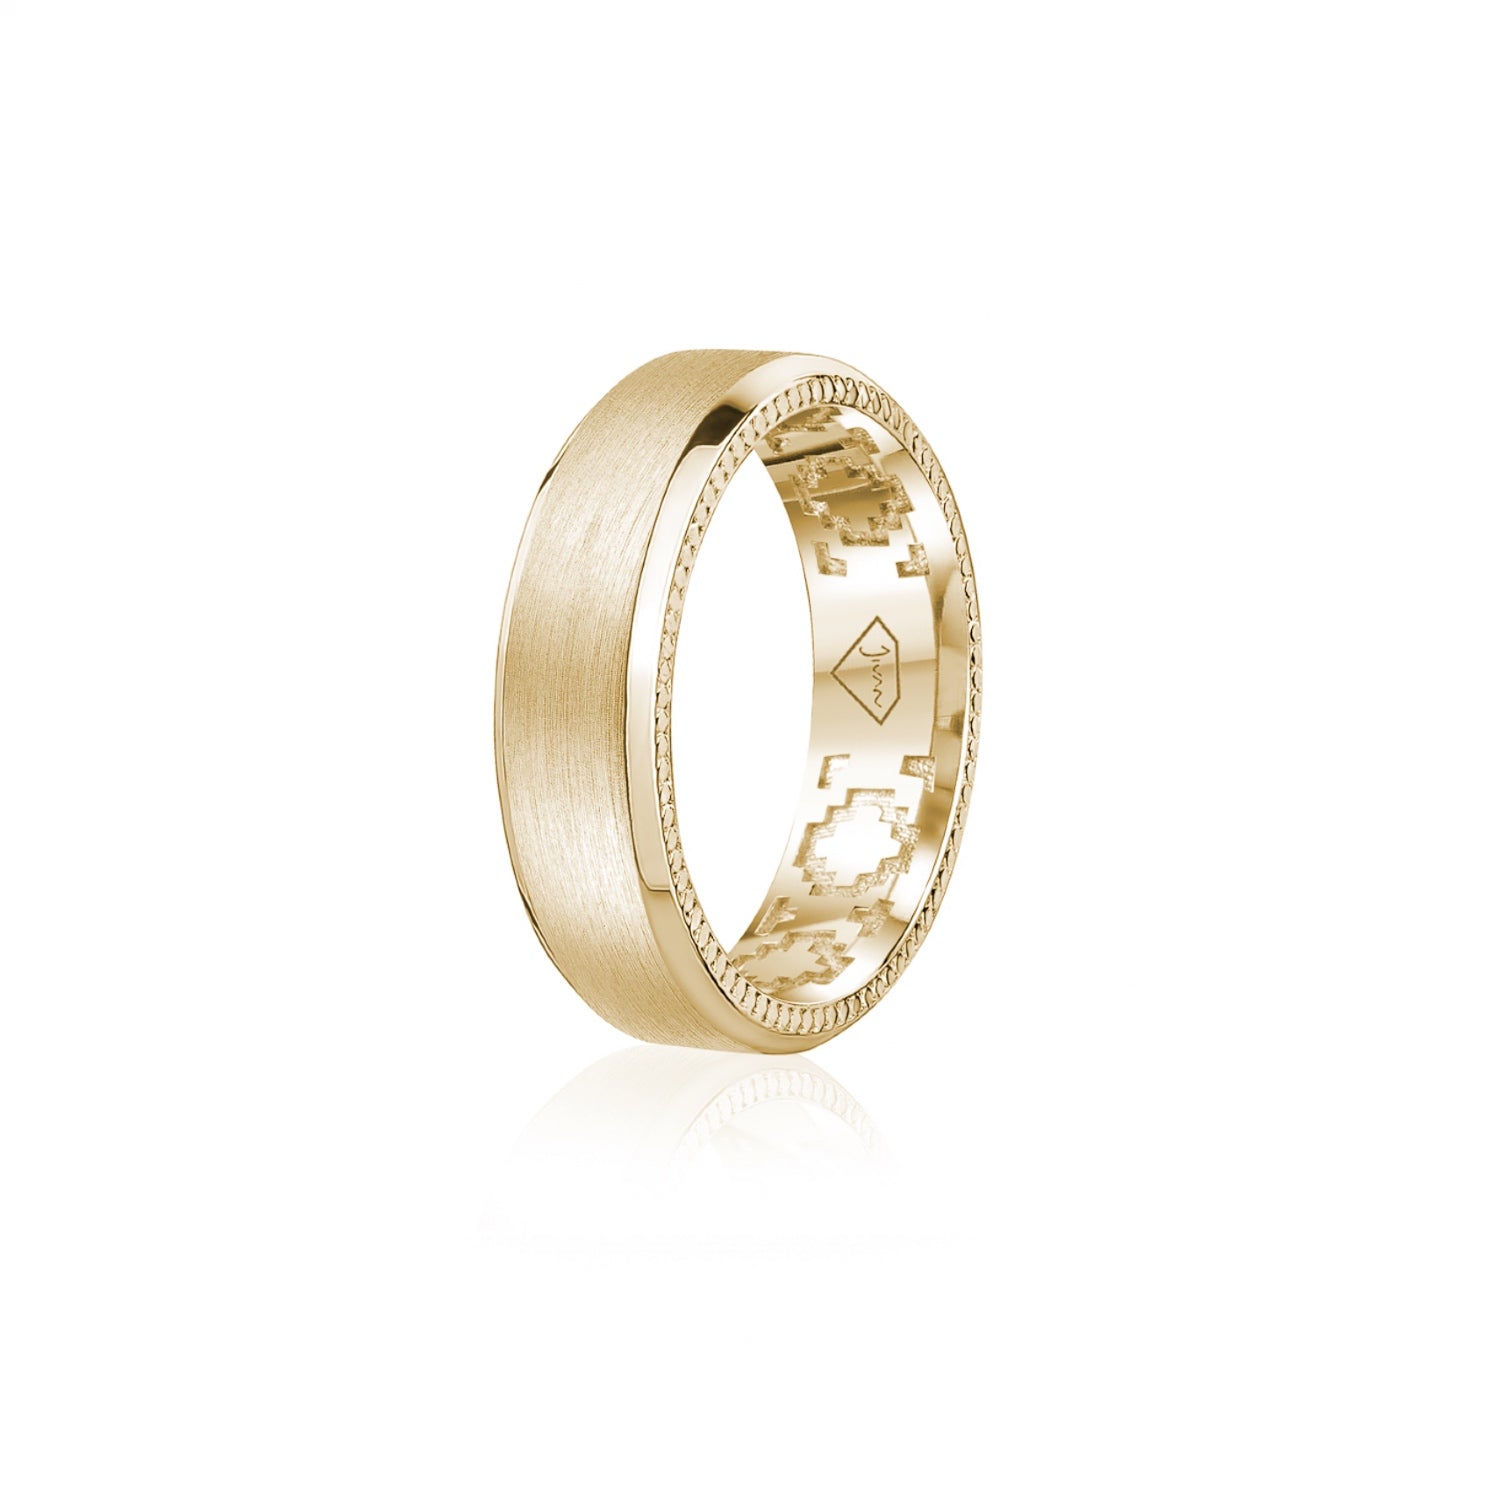 Step Motif Brushed Finish Bevelled Edge 8-9 mm Wedding Band in Yellow Gold